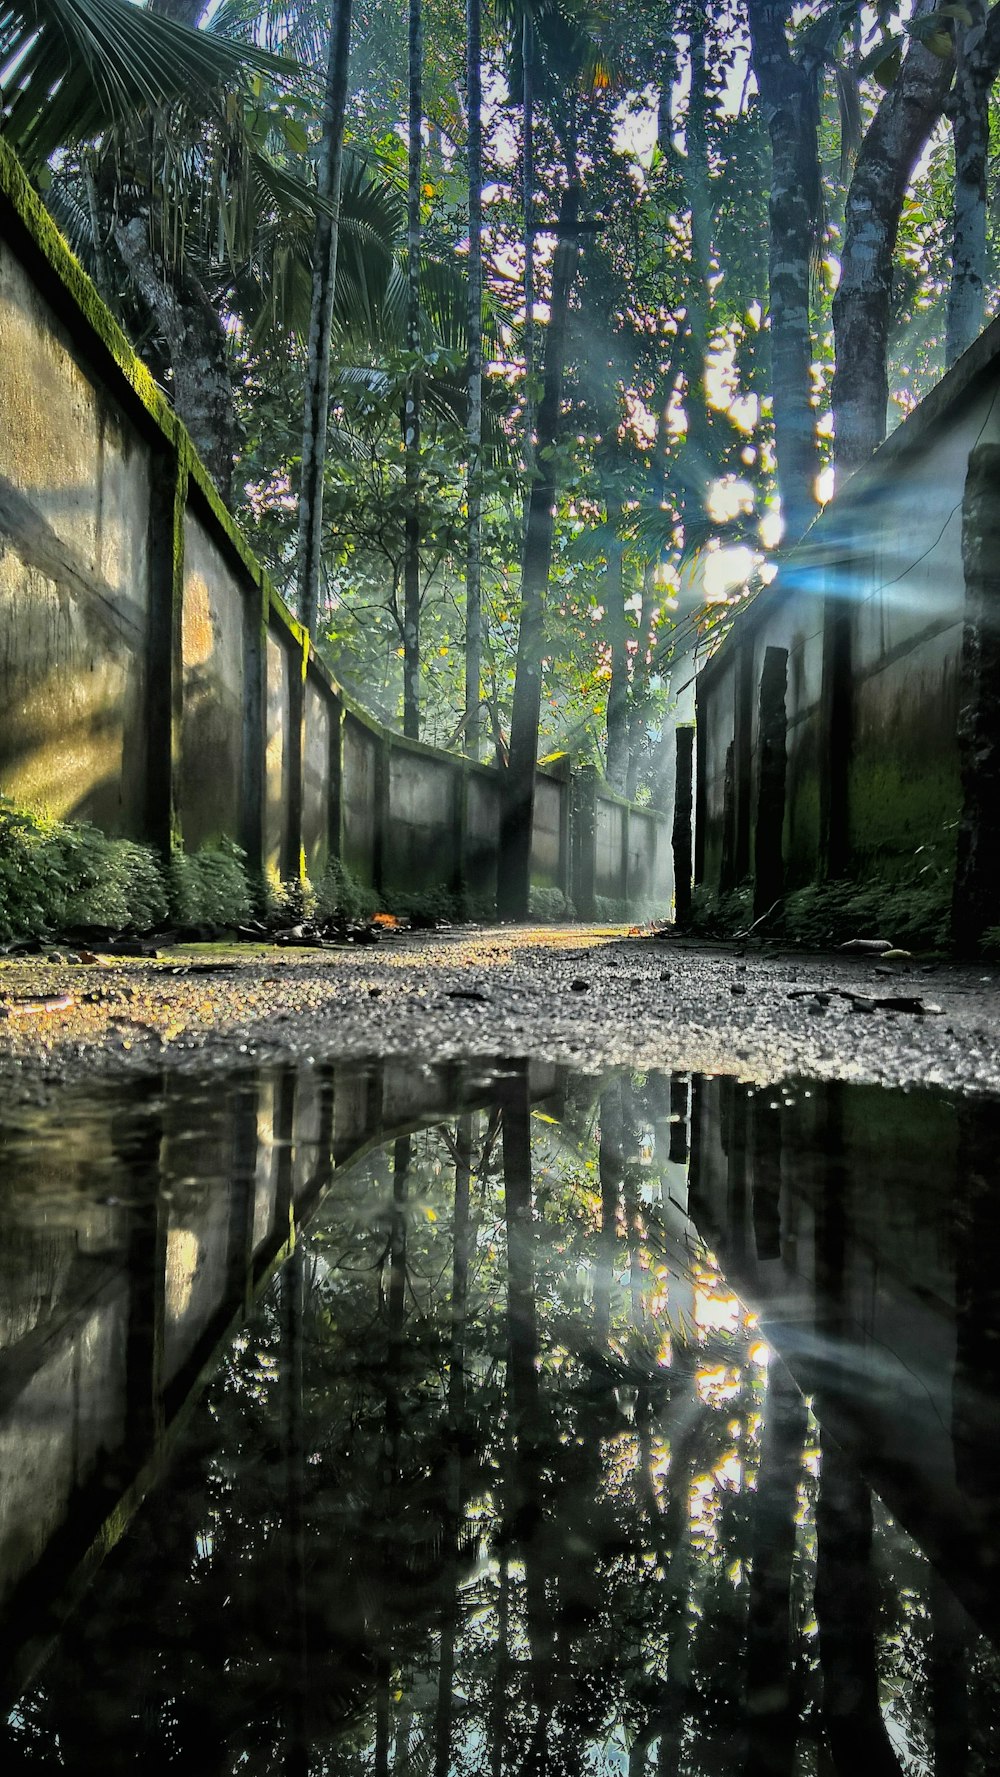 puddle near concrete walls and trees